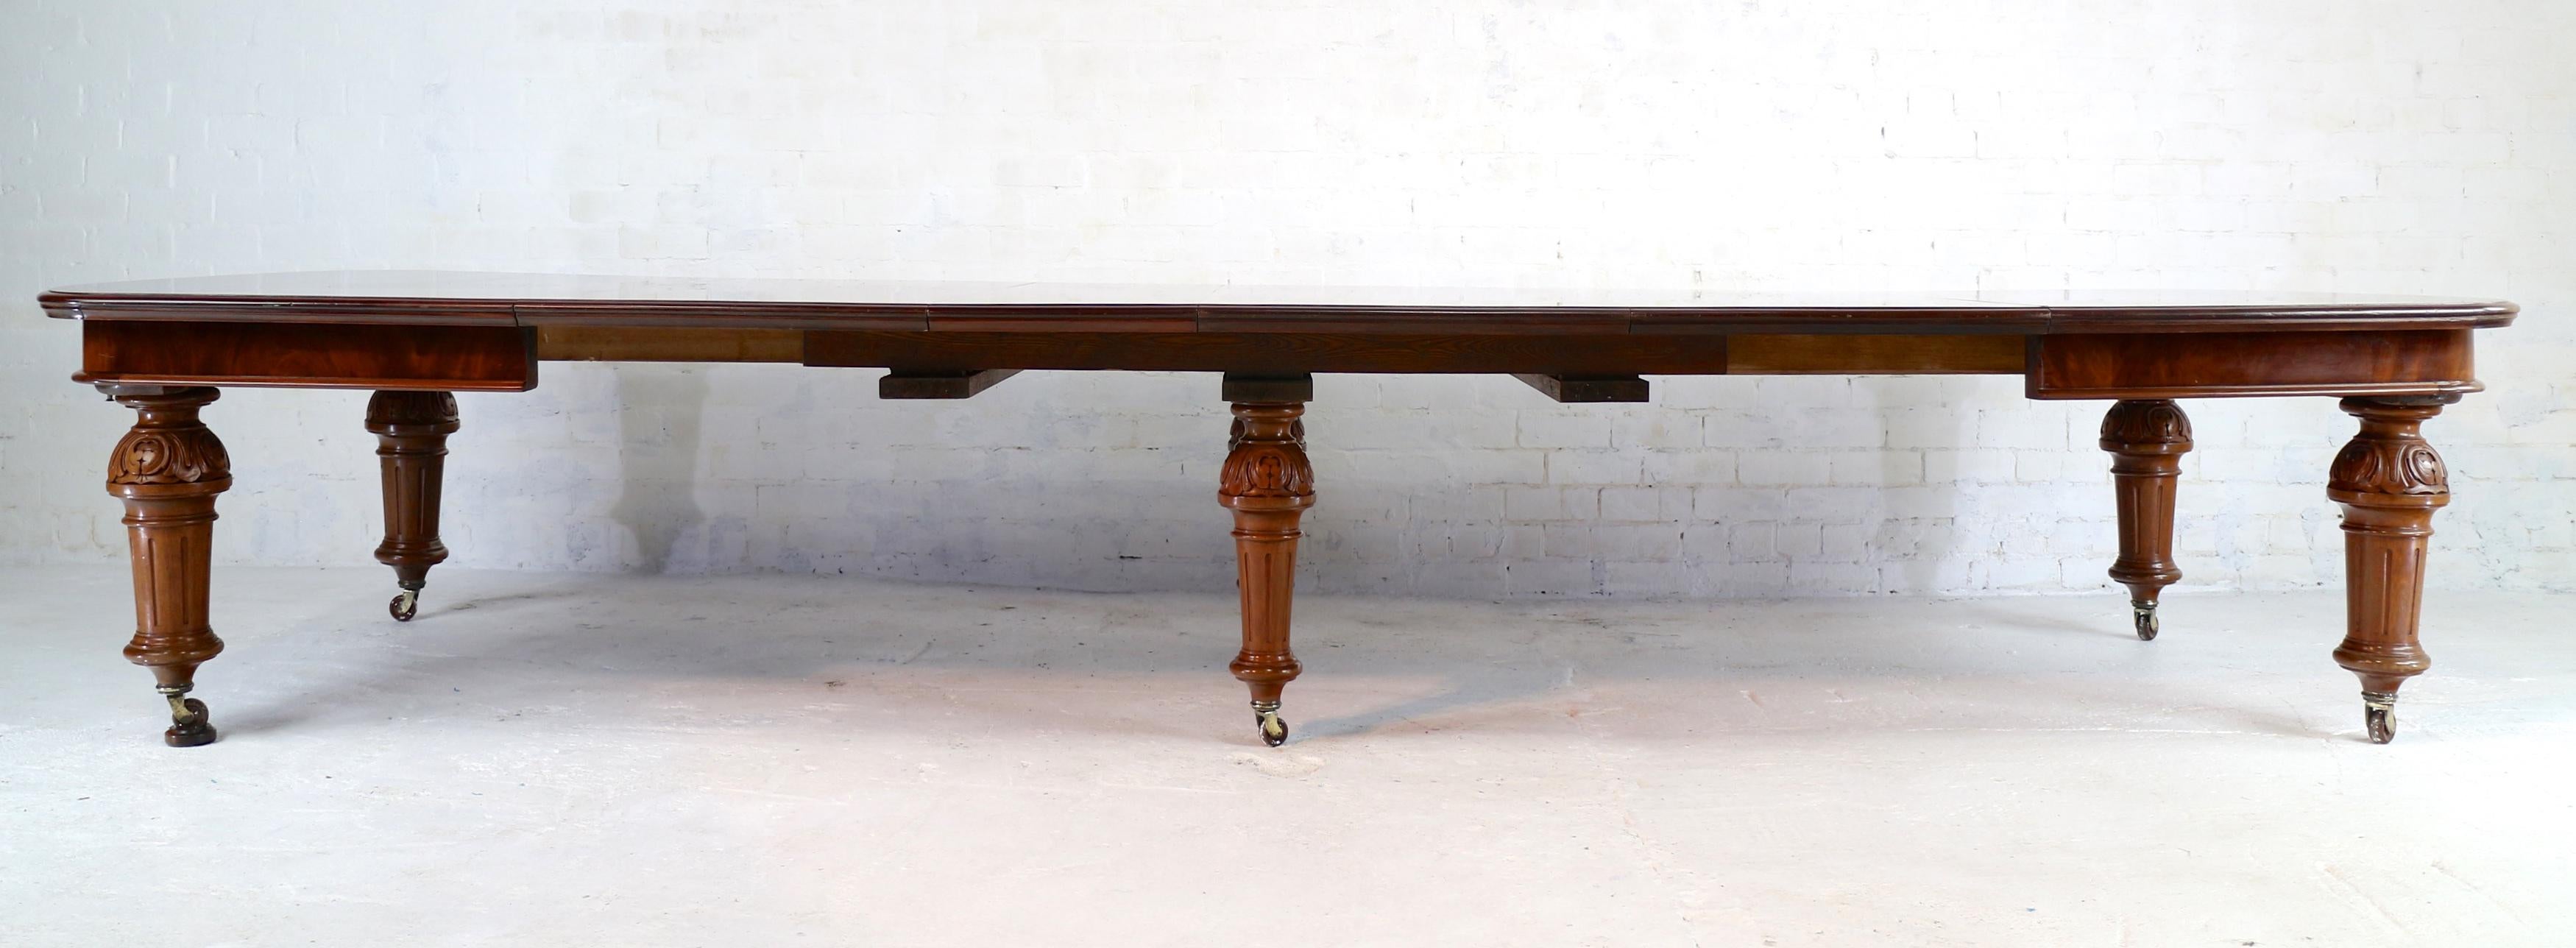 Wood Antique English Victorian Mahogany Extending Dining Table and 4 Leaves, Seats 16 For Sale